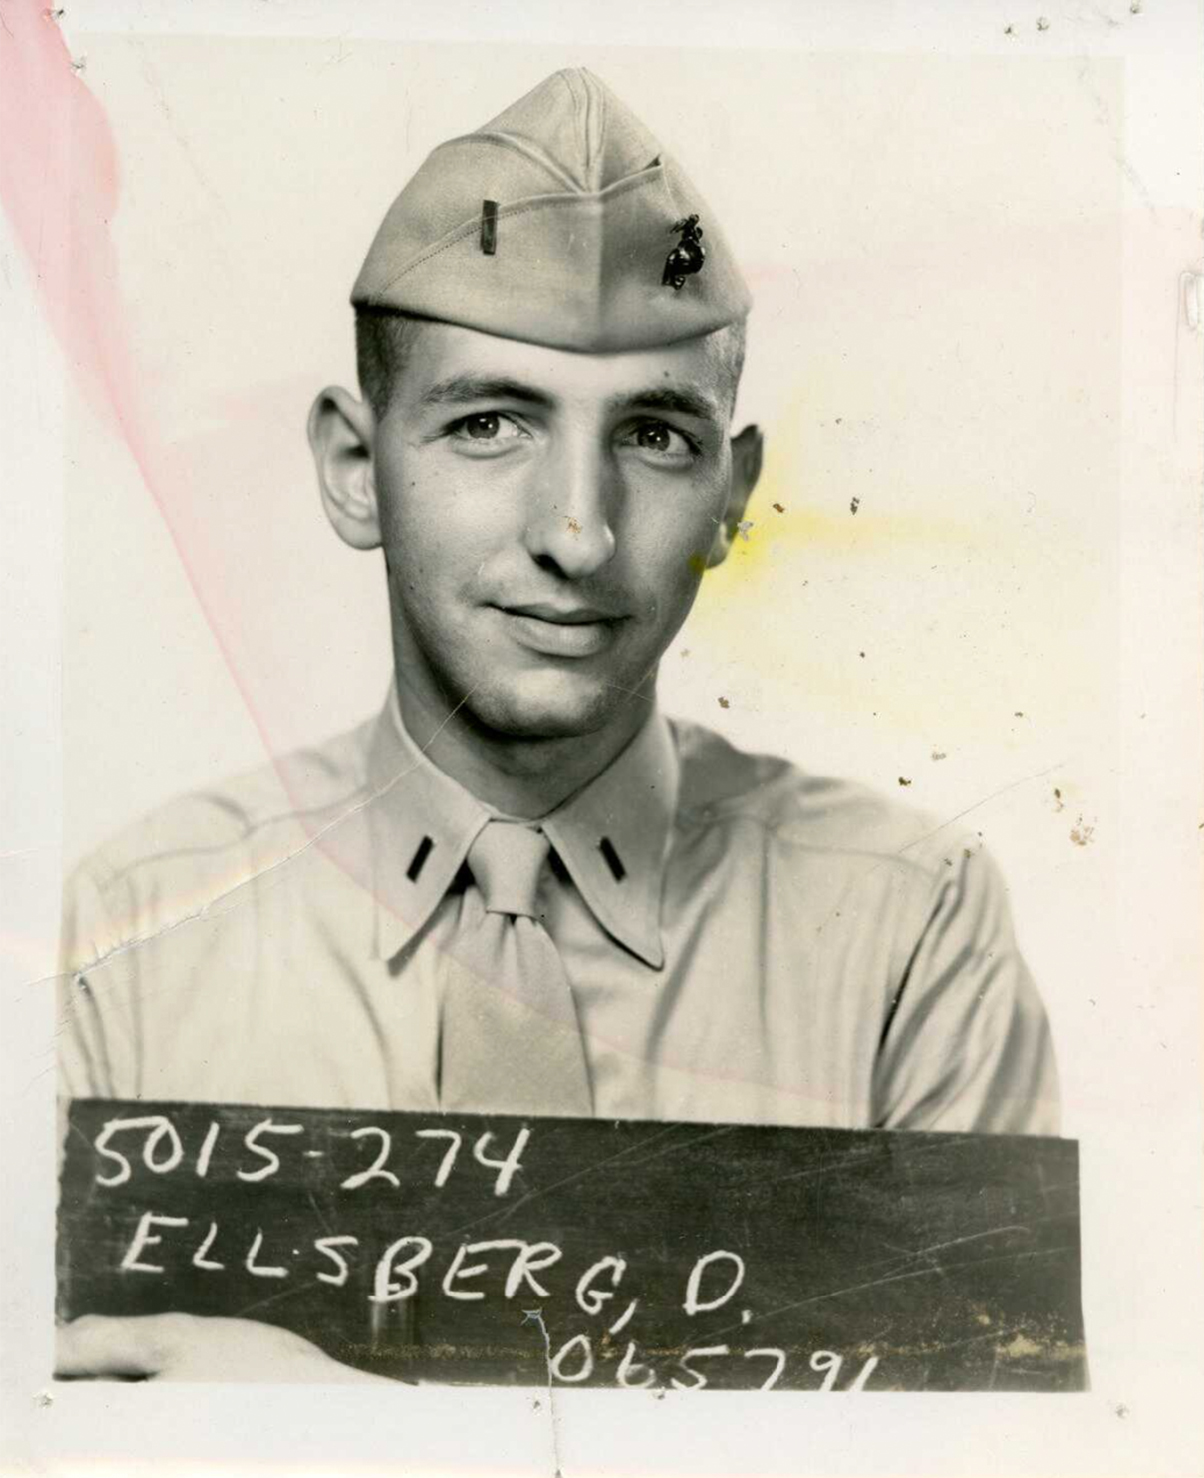 Ellsberg in uniform, 1954.  

Courtesy Daniel Ellsberg Papers, Robert S. Cox Special Collections and University Archives Research Center, UMass Amherst Libraries